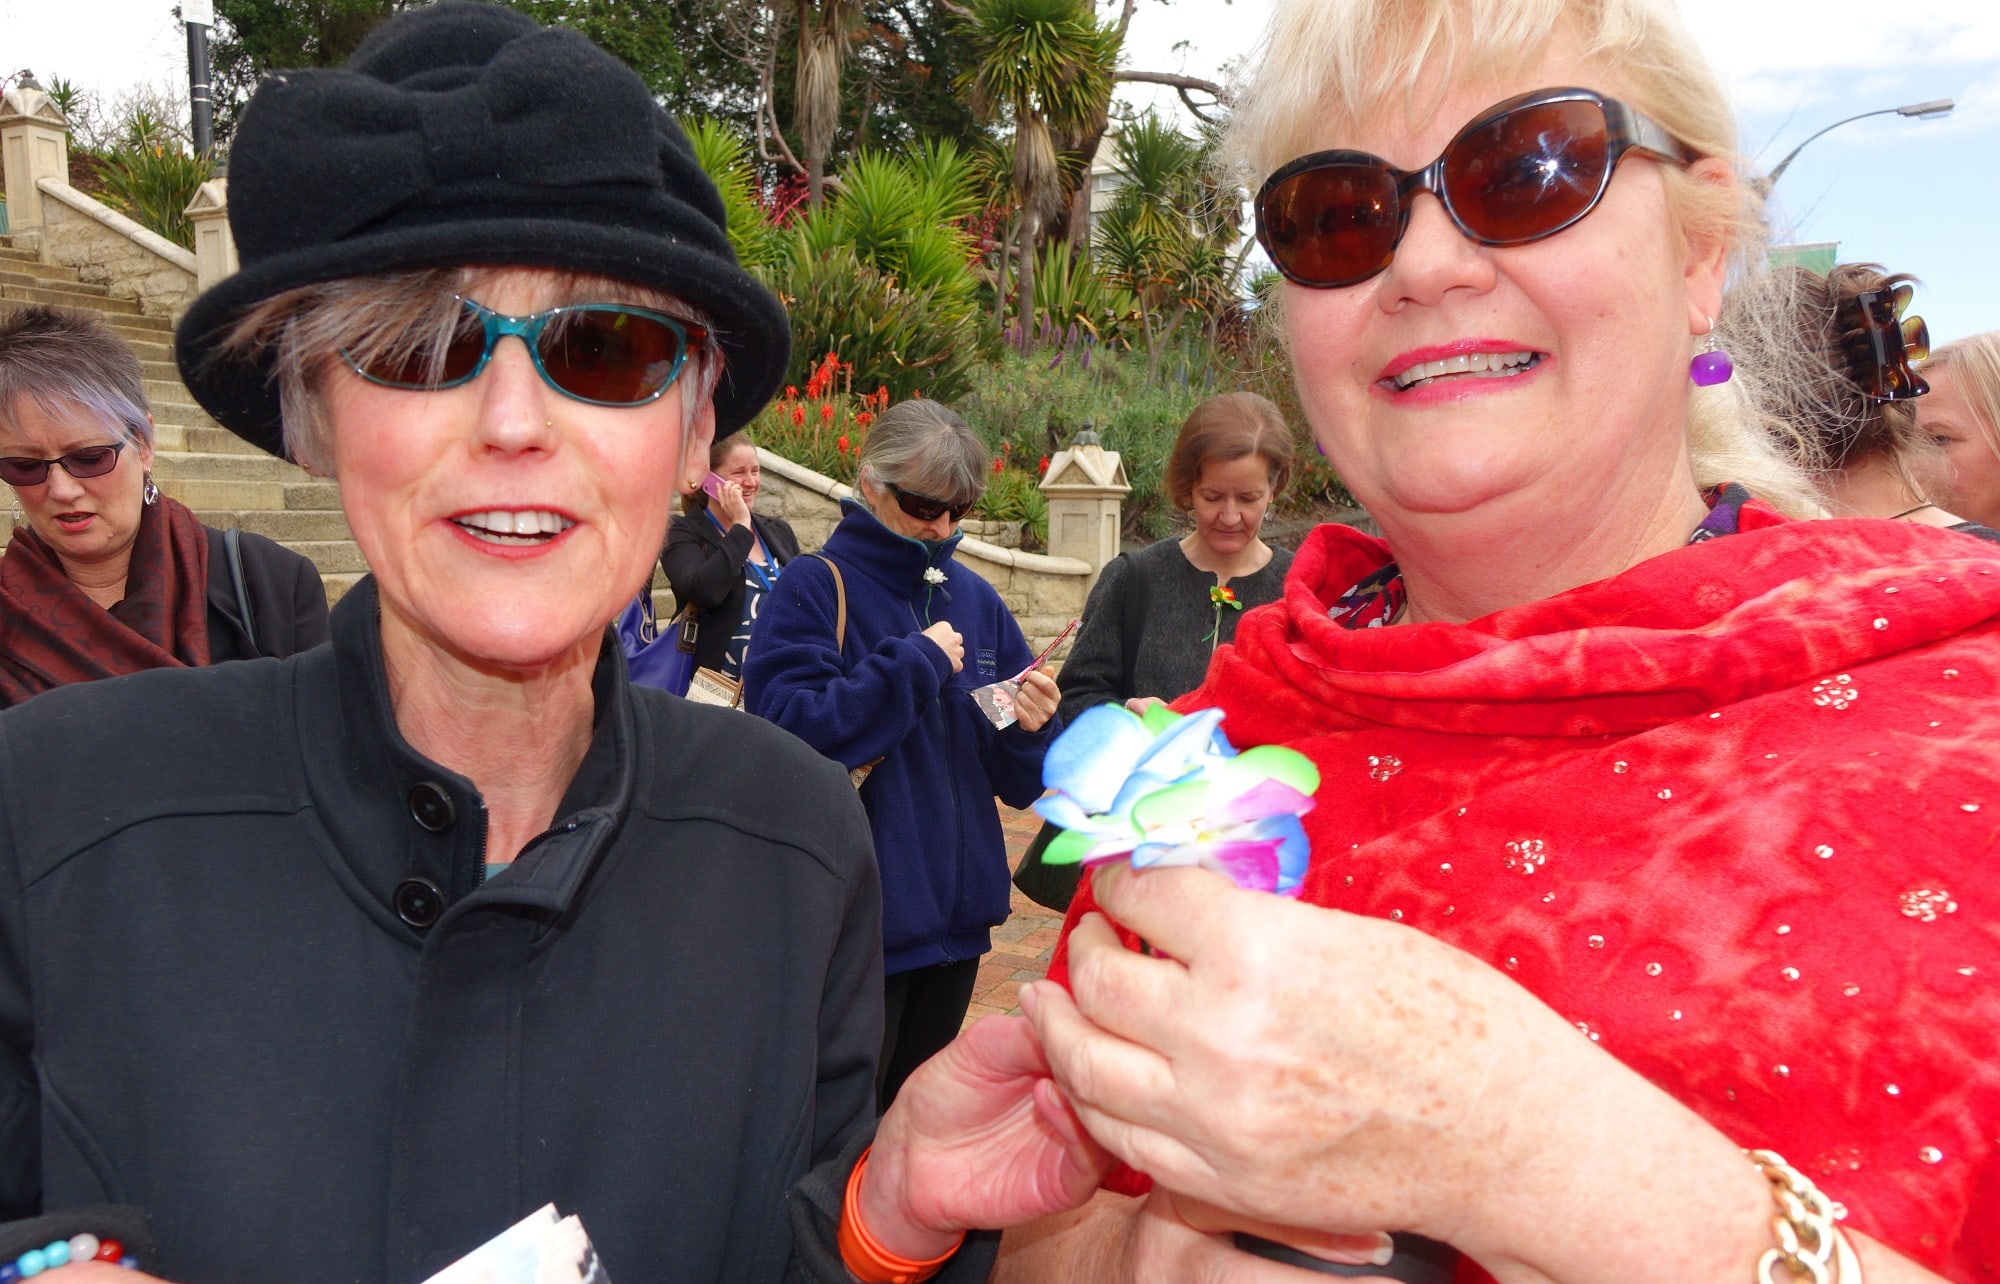 Suffrage day walk organiser Pip Jamieson (left) and Marie Elliott from the office of the registrar for electors.